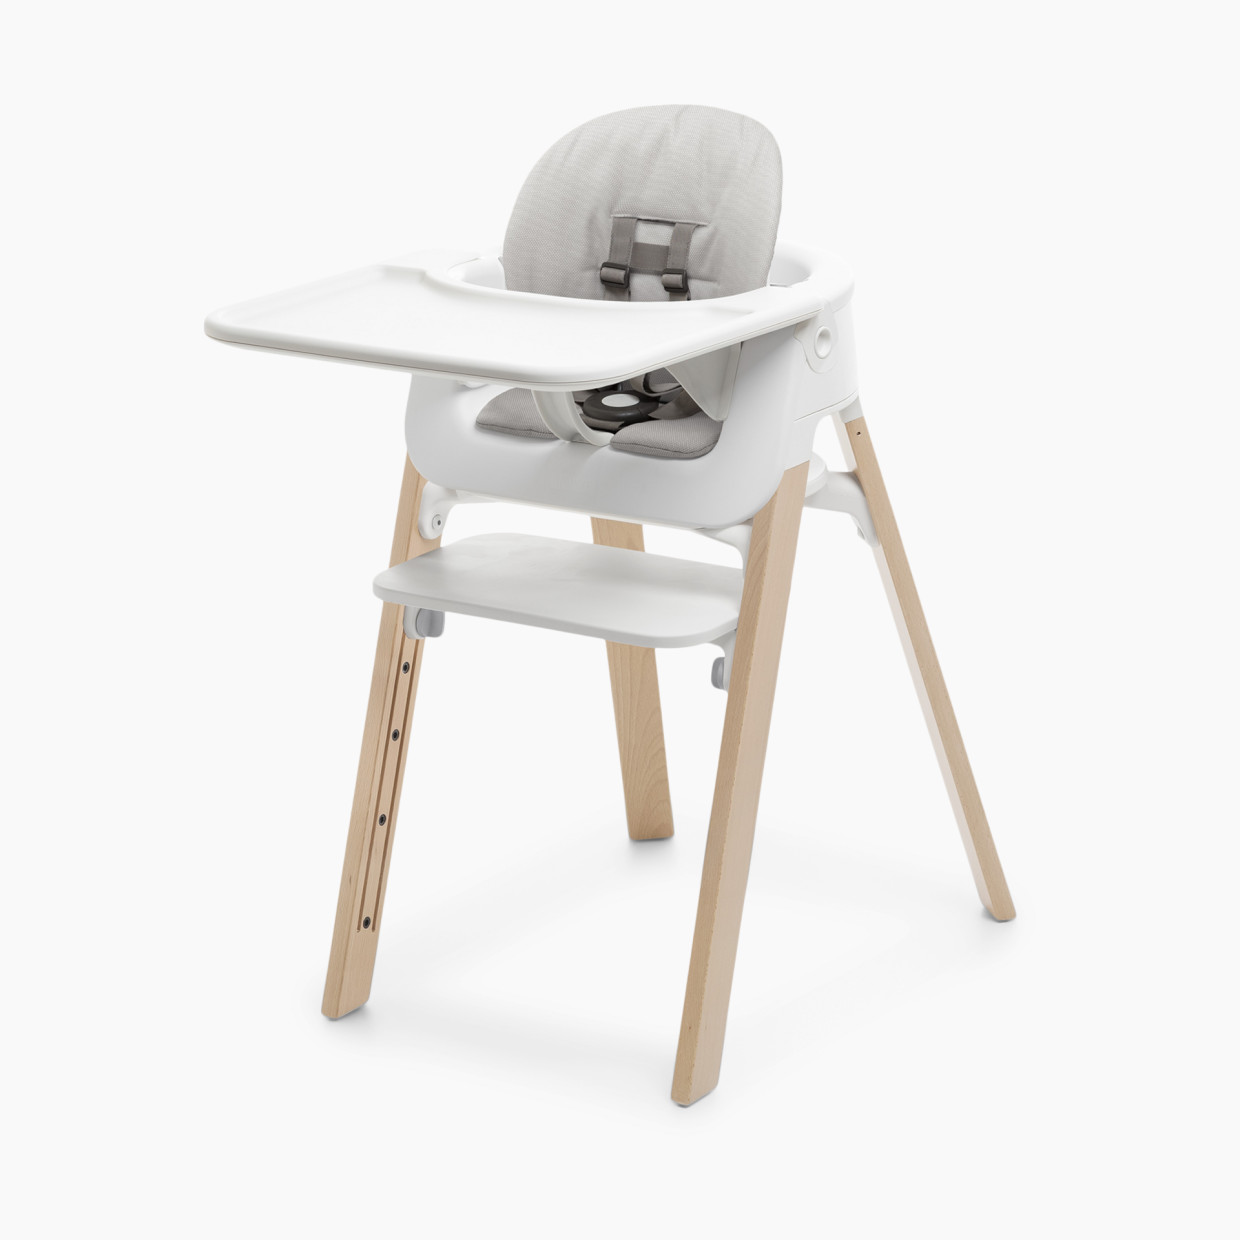 Stokke Steps Complete High Chair - White Seat/Natural Legs.